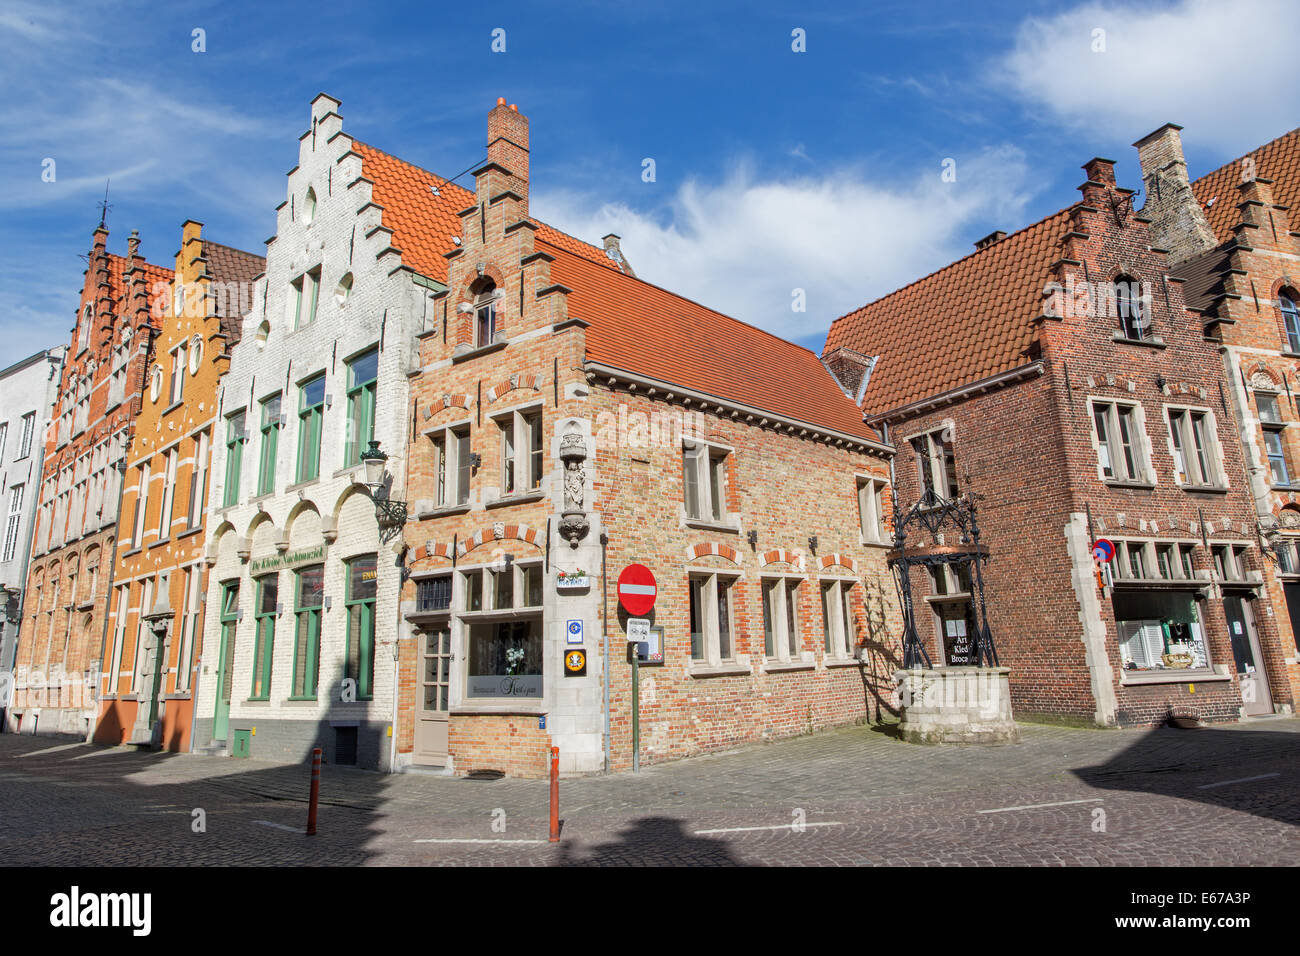 BRUGES, BELGIUM - JUNE 13, 2014: Typically brick house from st. Jacobstraat street. Stock Photo